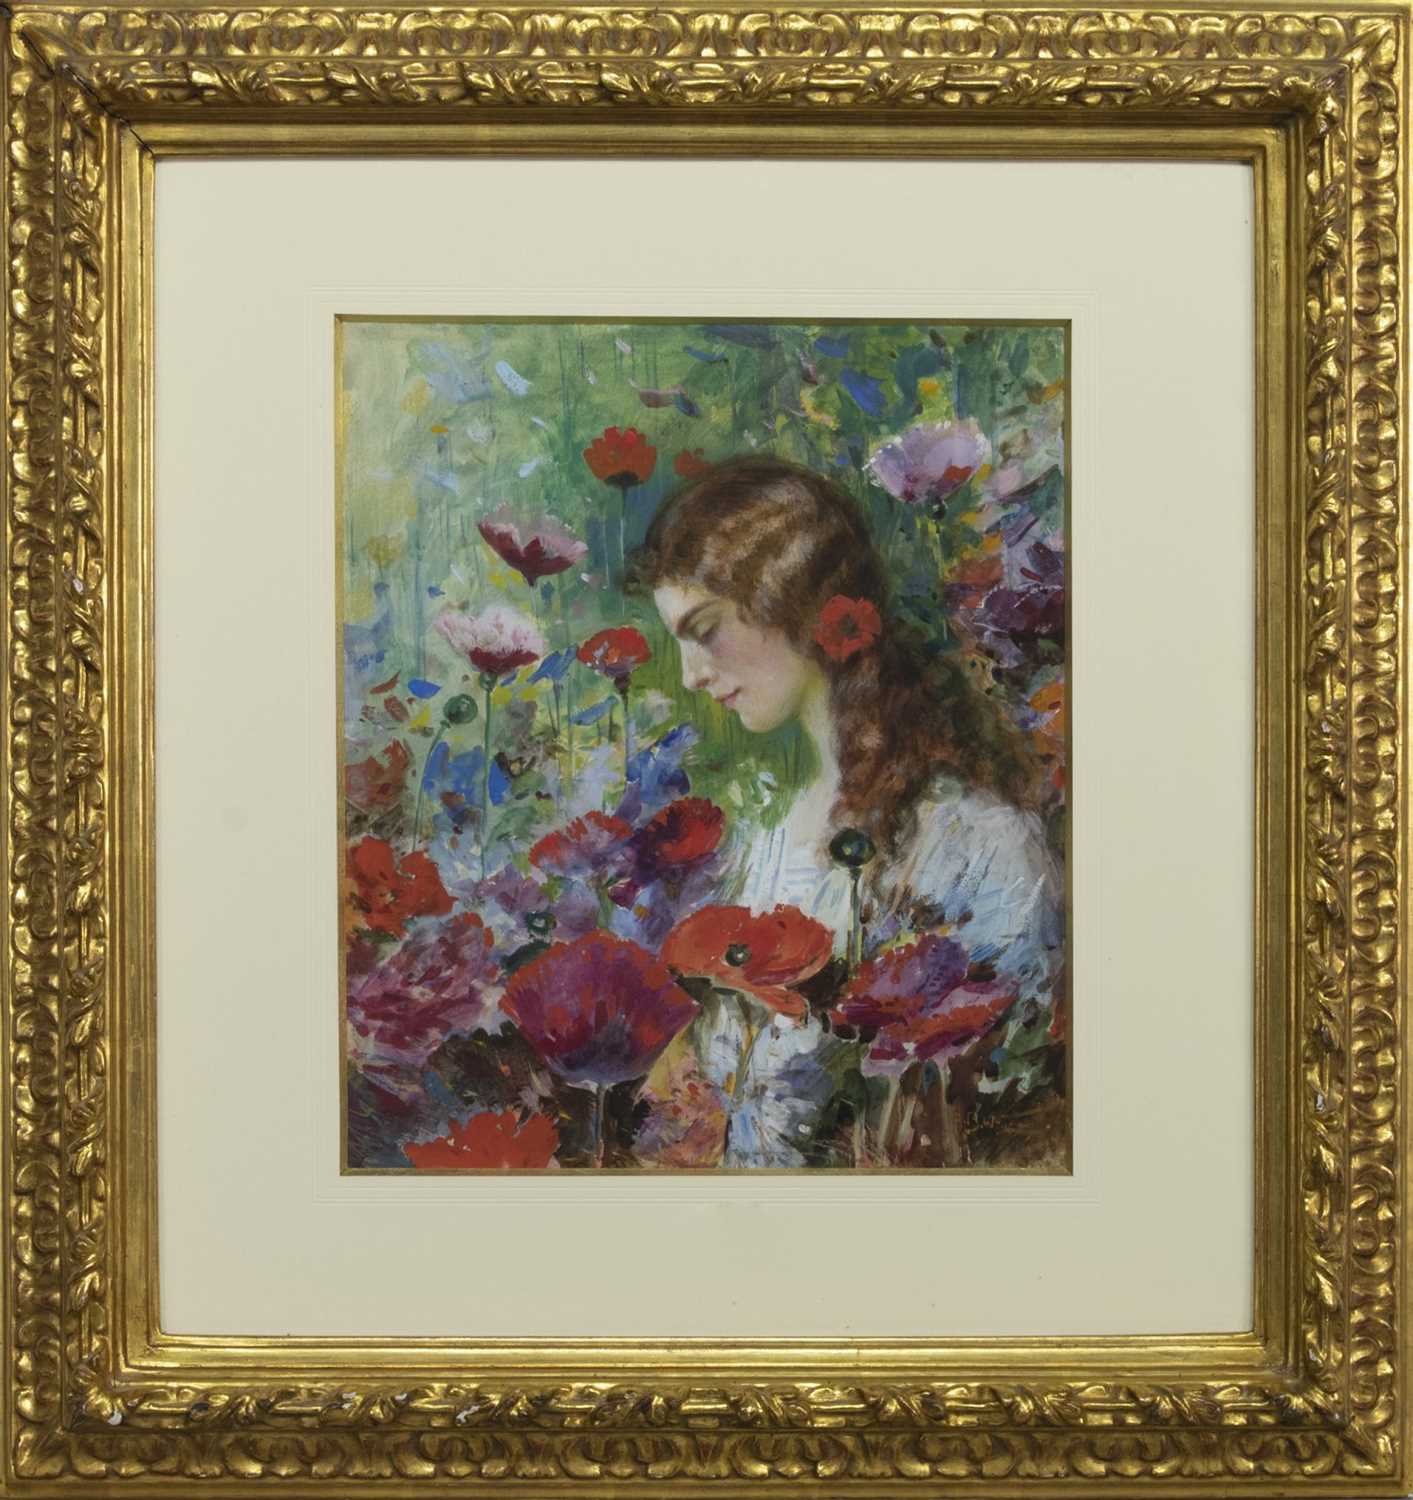 Lot 338 - GIRL AMONG THE FLOWERS, A WATERCOLOUR BY A B WHITE